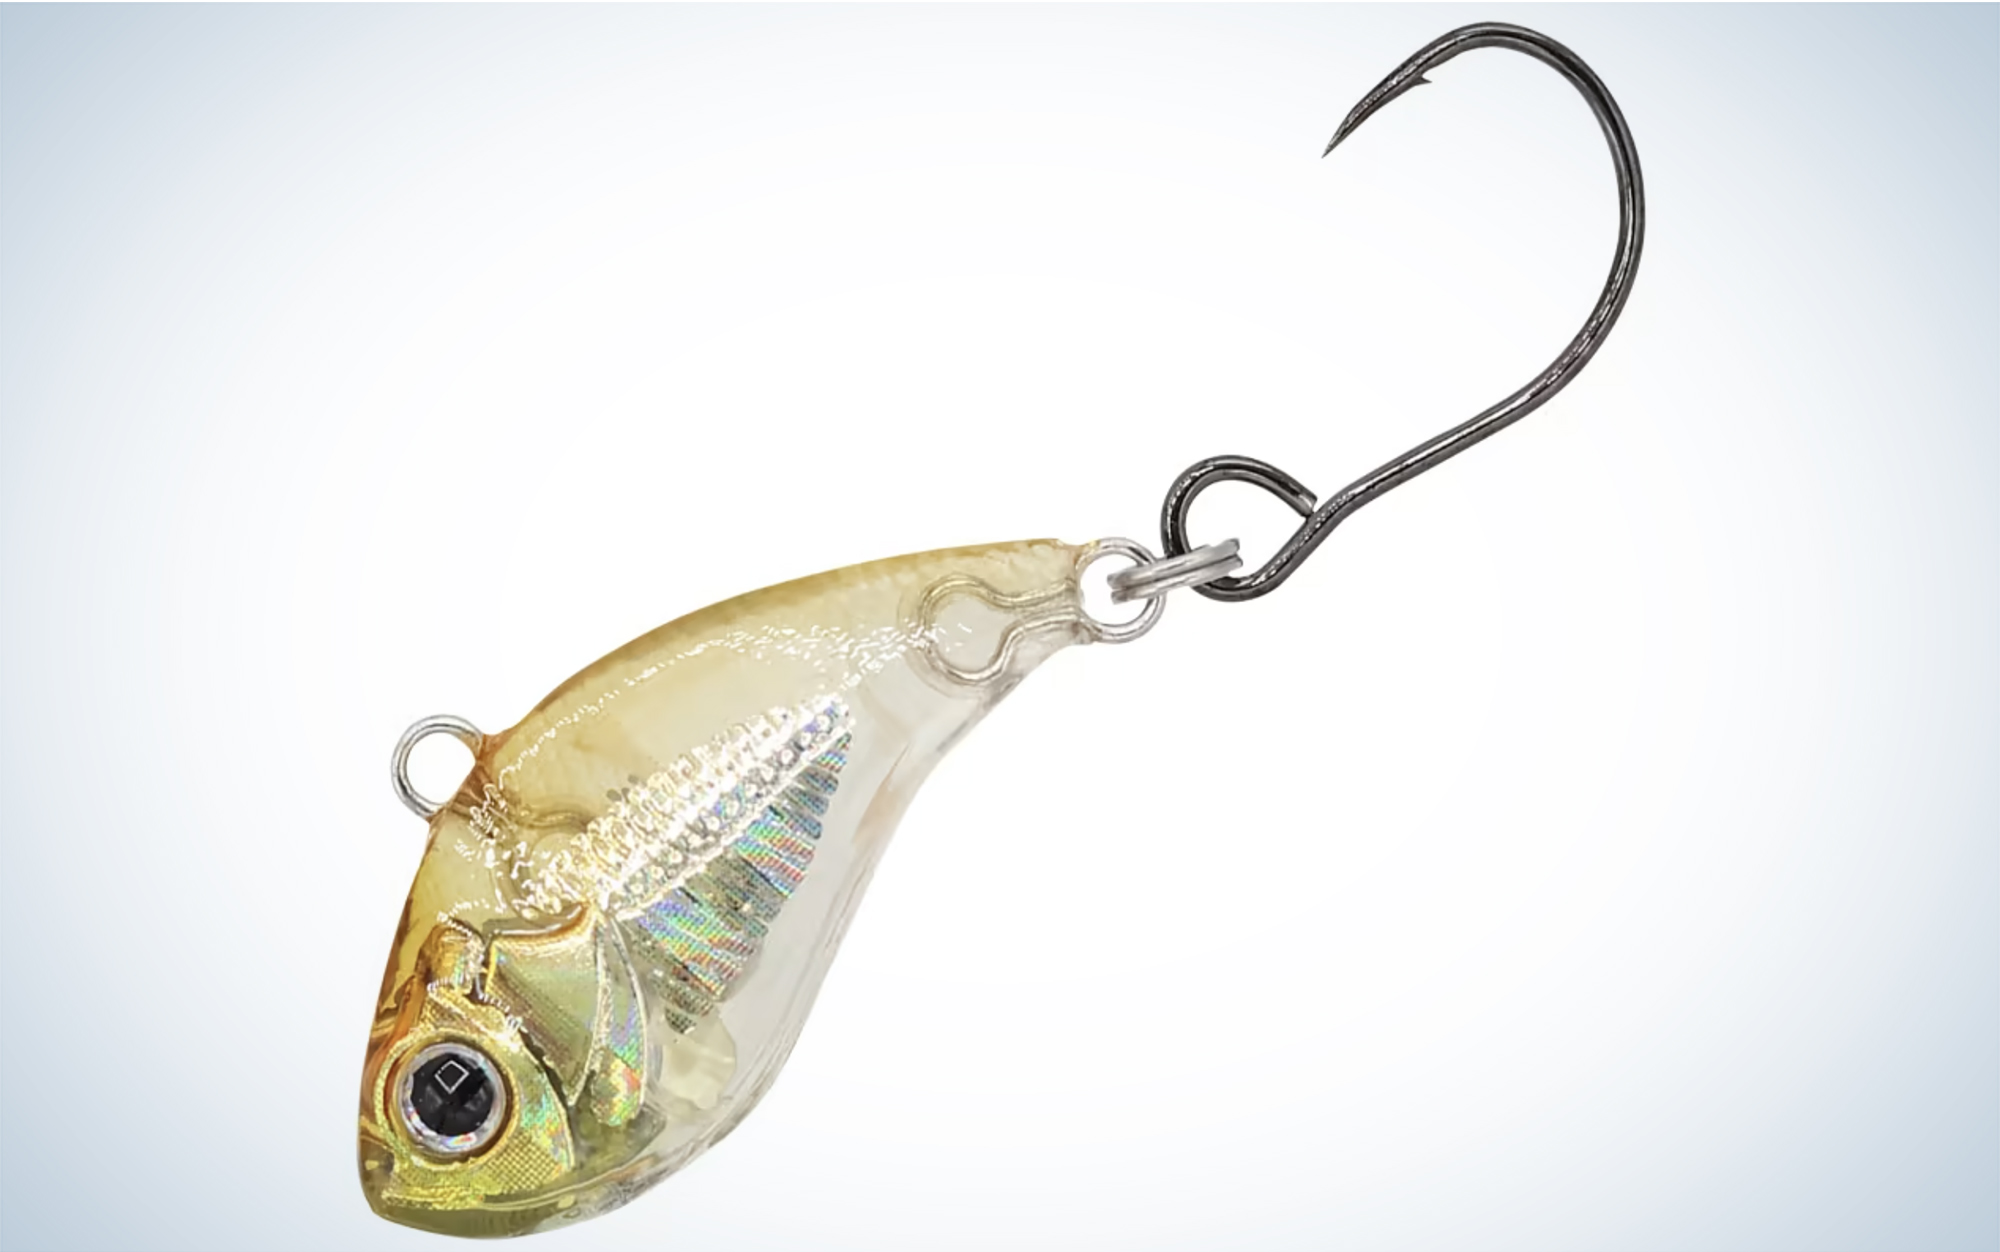 Tackle Tip Tuesday - Top 5 Walleye Fishing Lure's - Ice Fishing Edition 